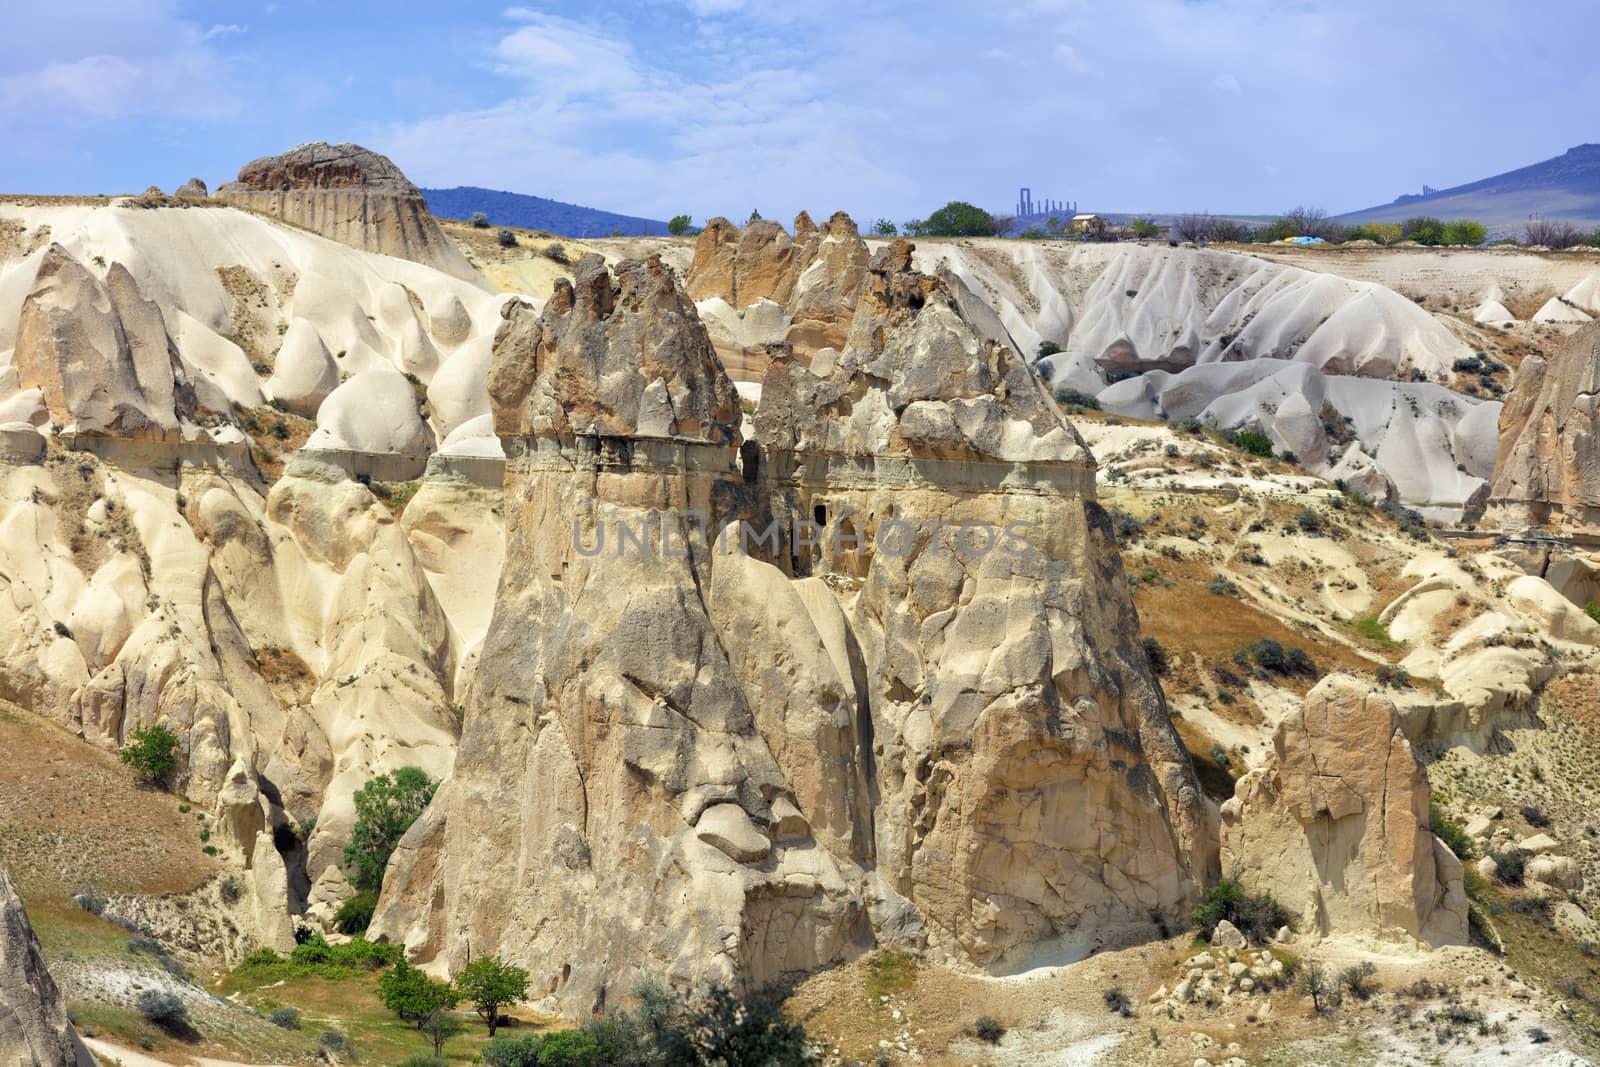 Red and white sandstone cliffs, ancient caves in a mountain landscape of valleys in Cappadocia, central Turkey